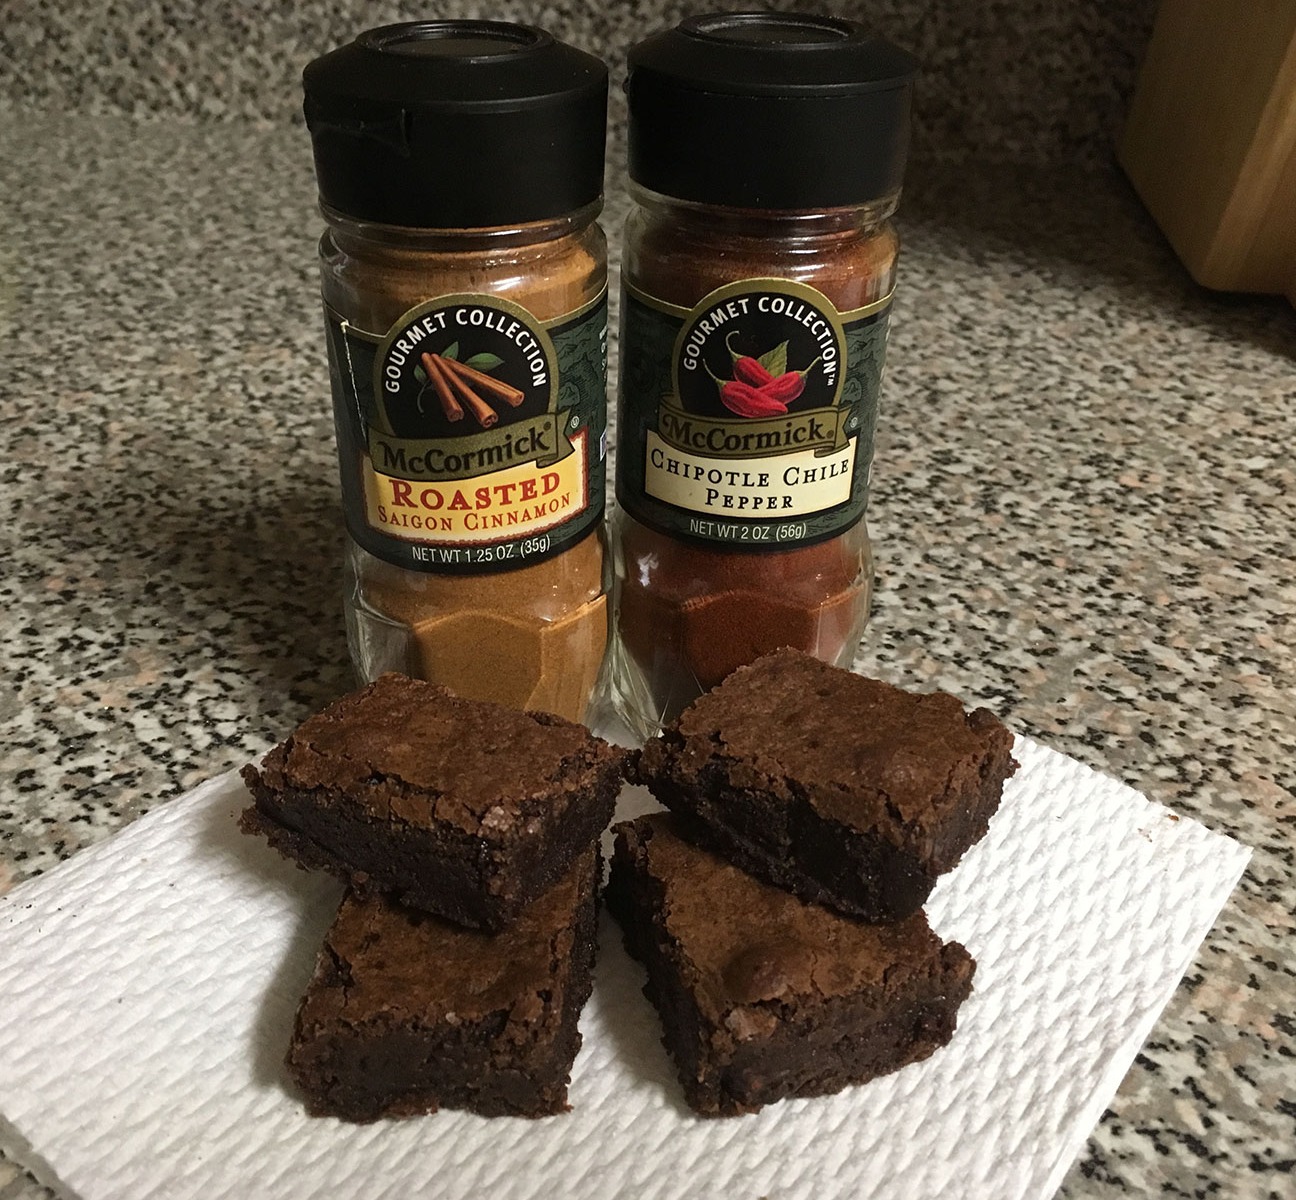 Brownies with cinnamon and chipotle pepper